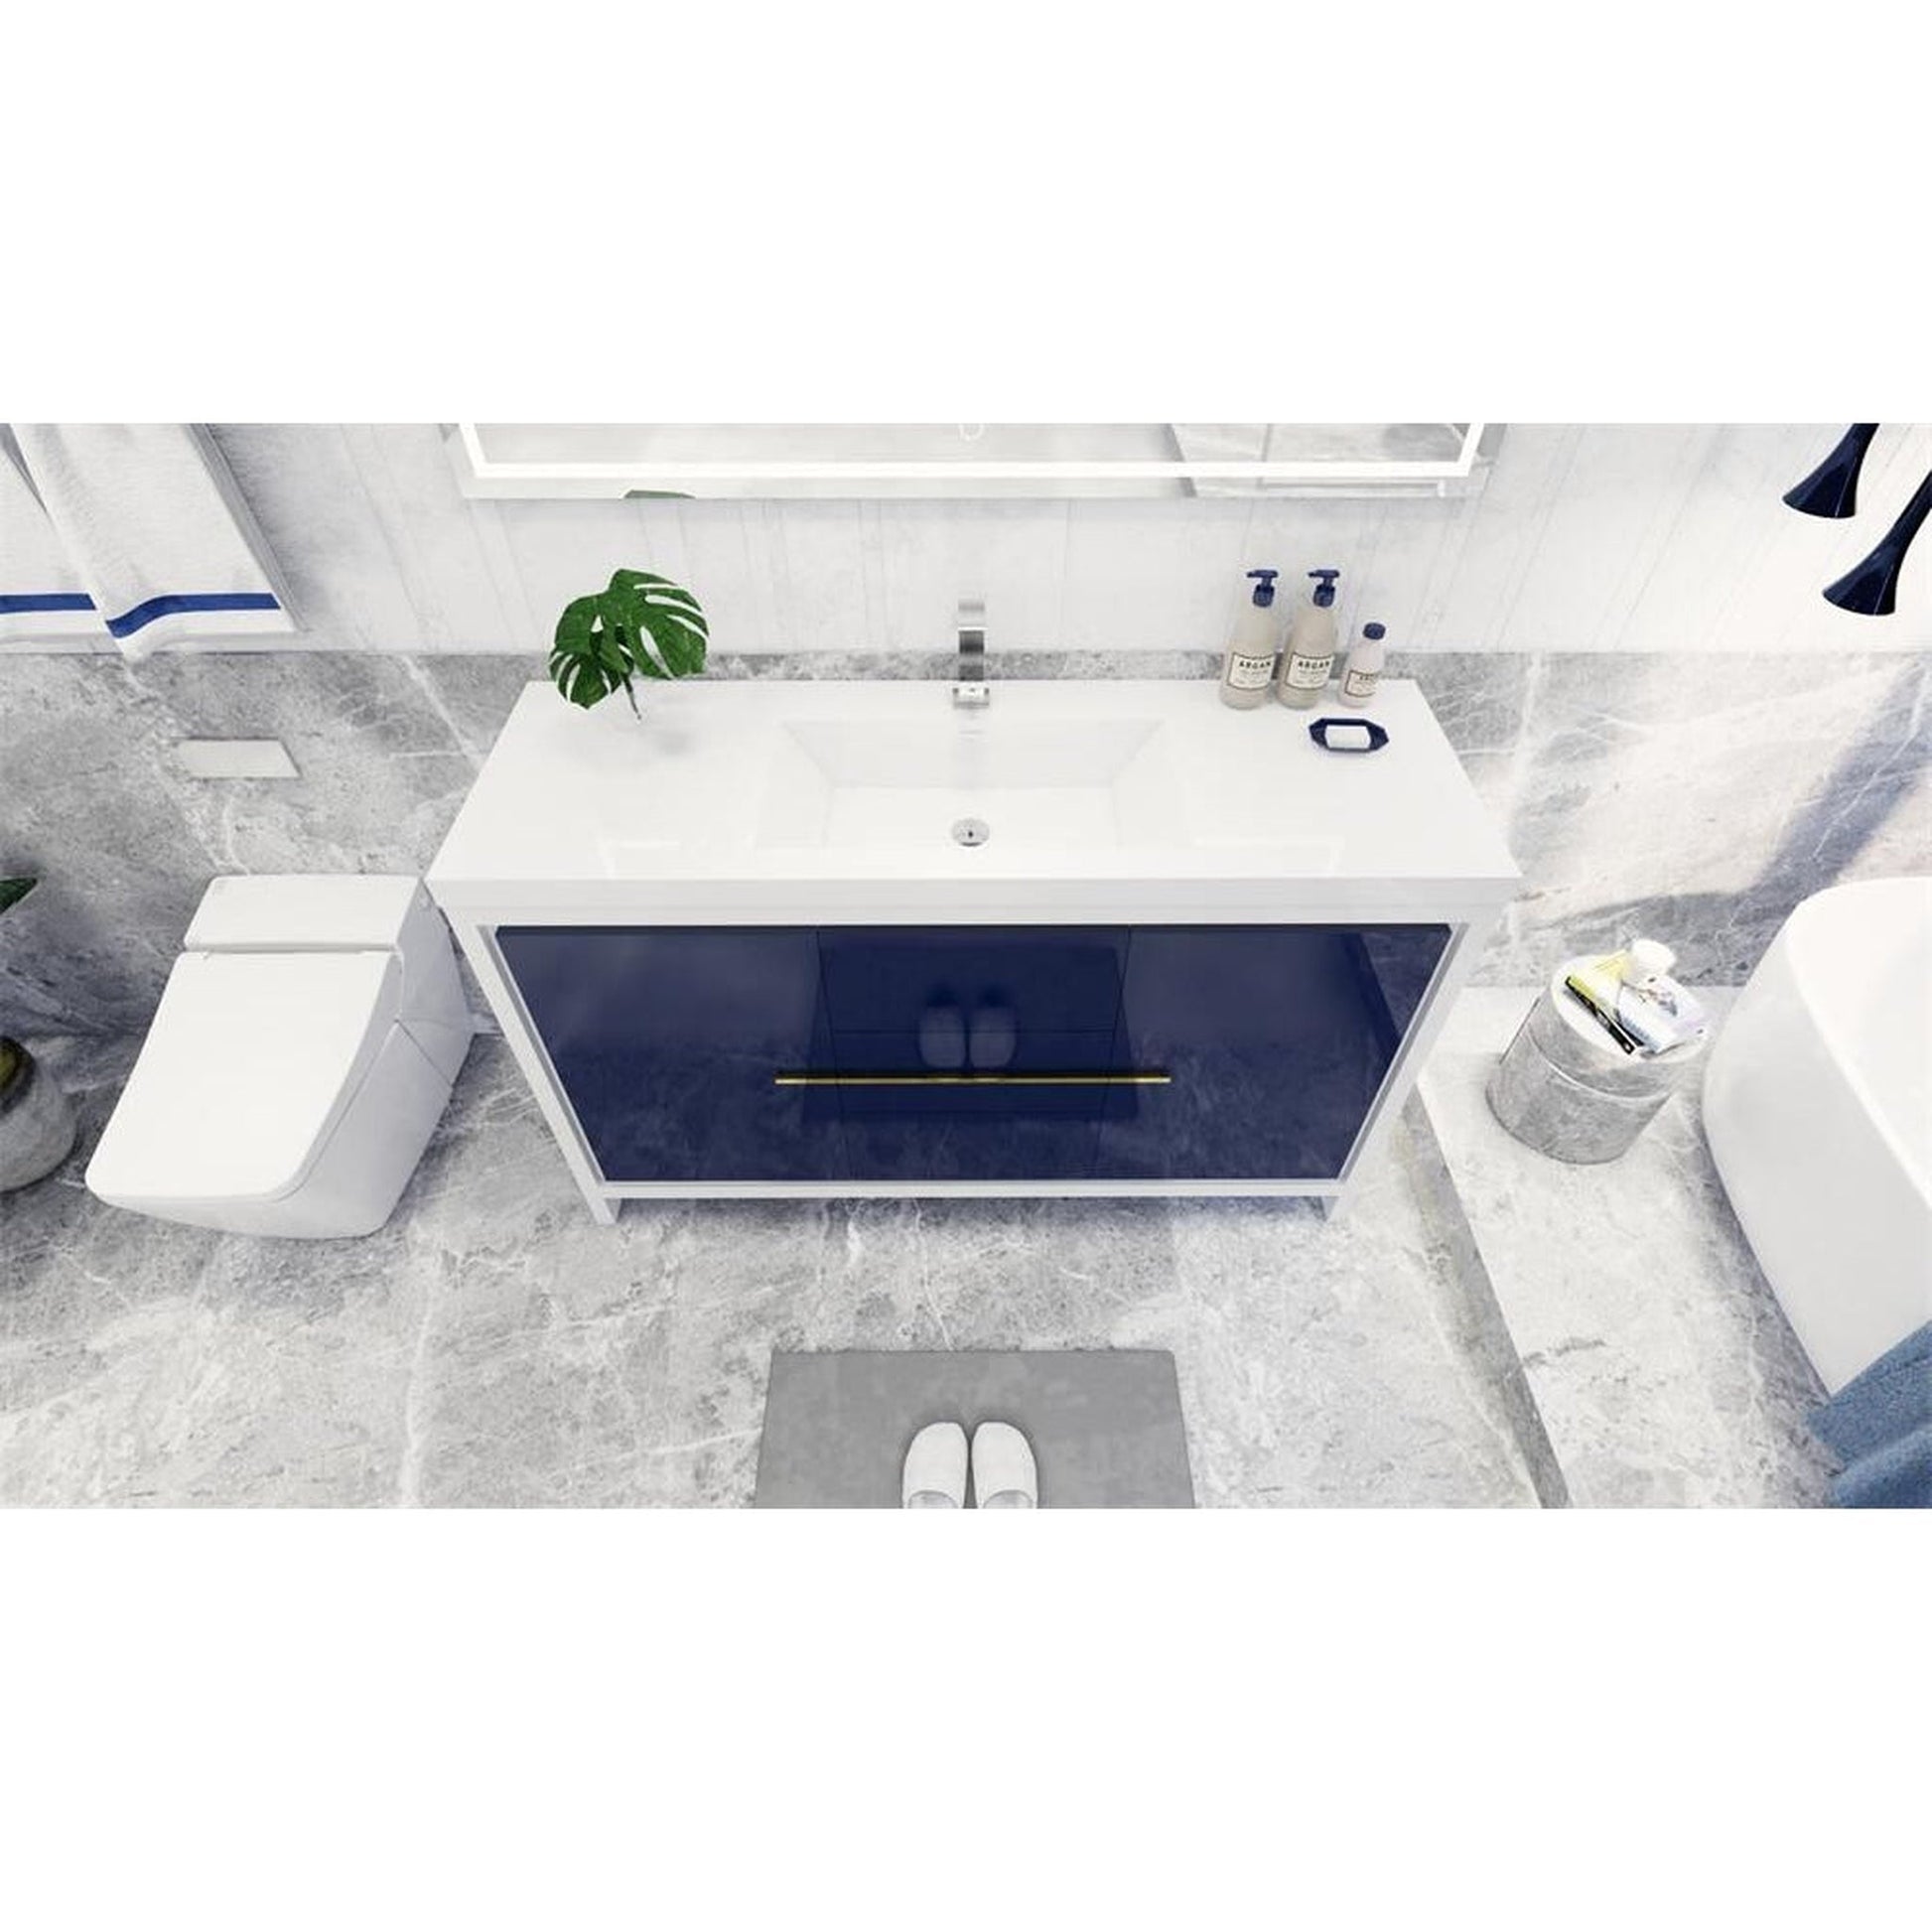 Moreno Bath Dolce 60" High Gloss Night Blue Freestanding Vanity With Single Reinforced White Acrylic Sink